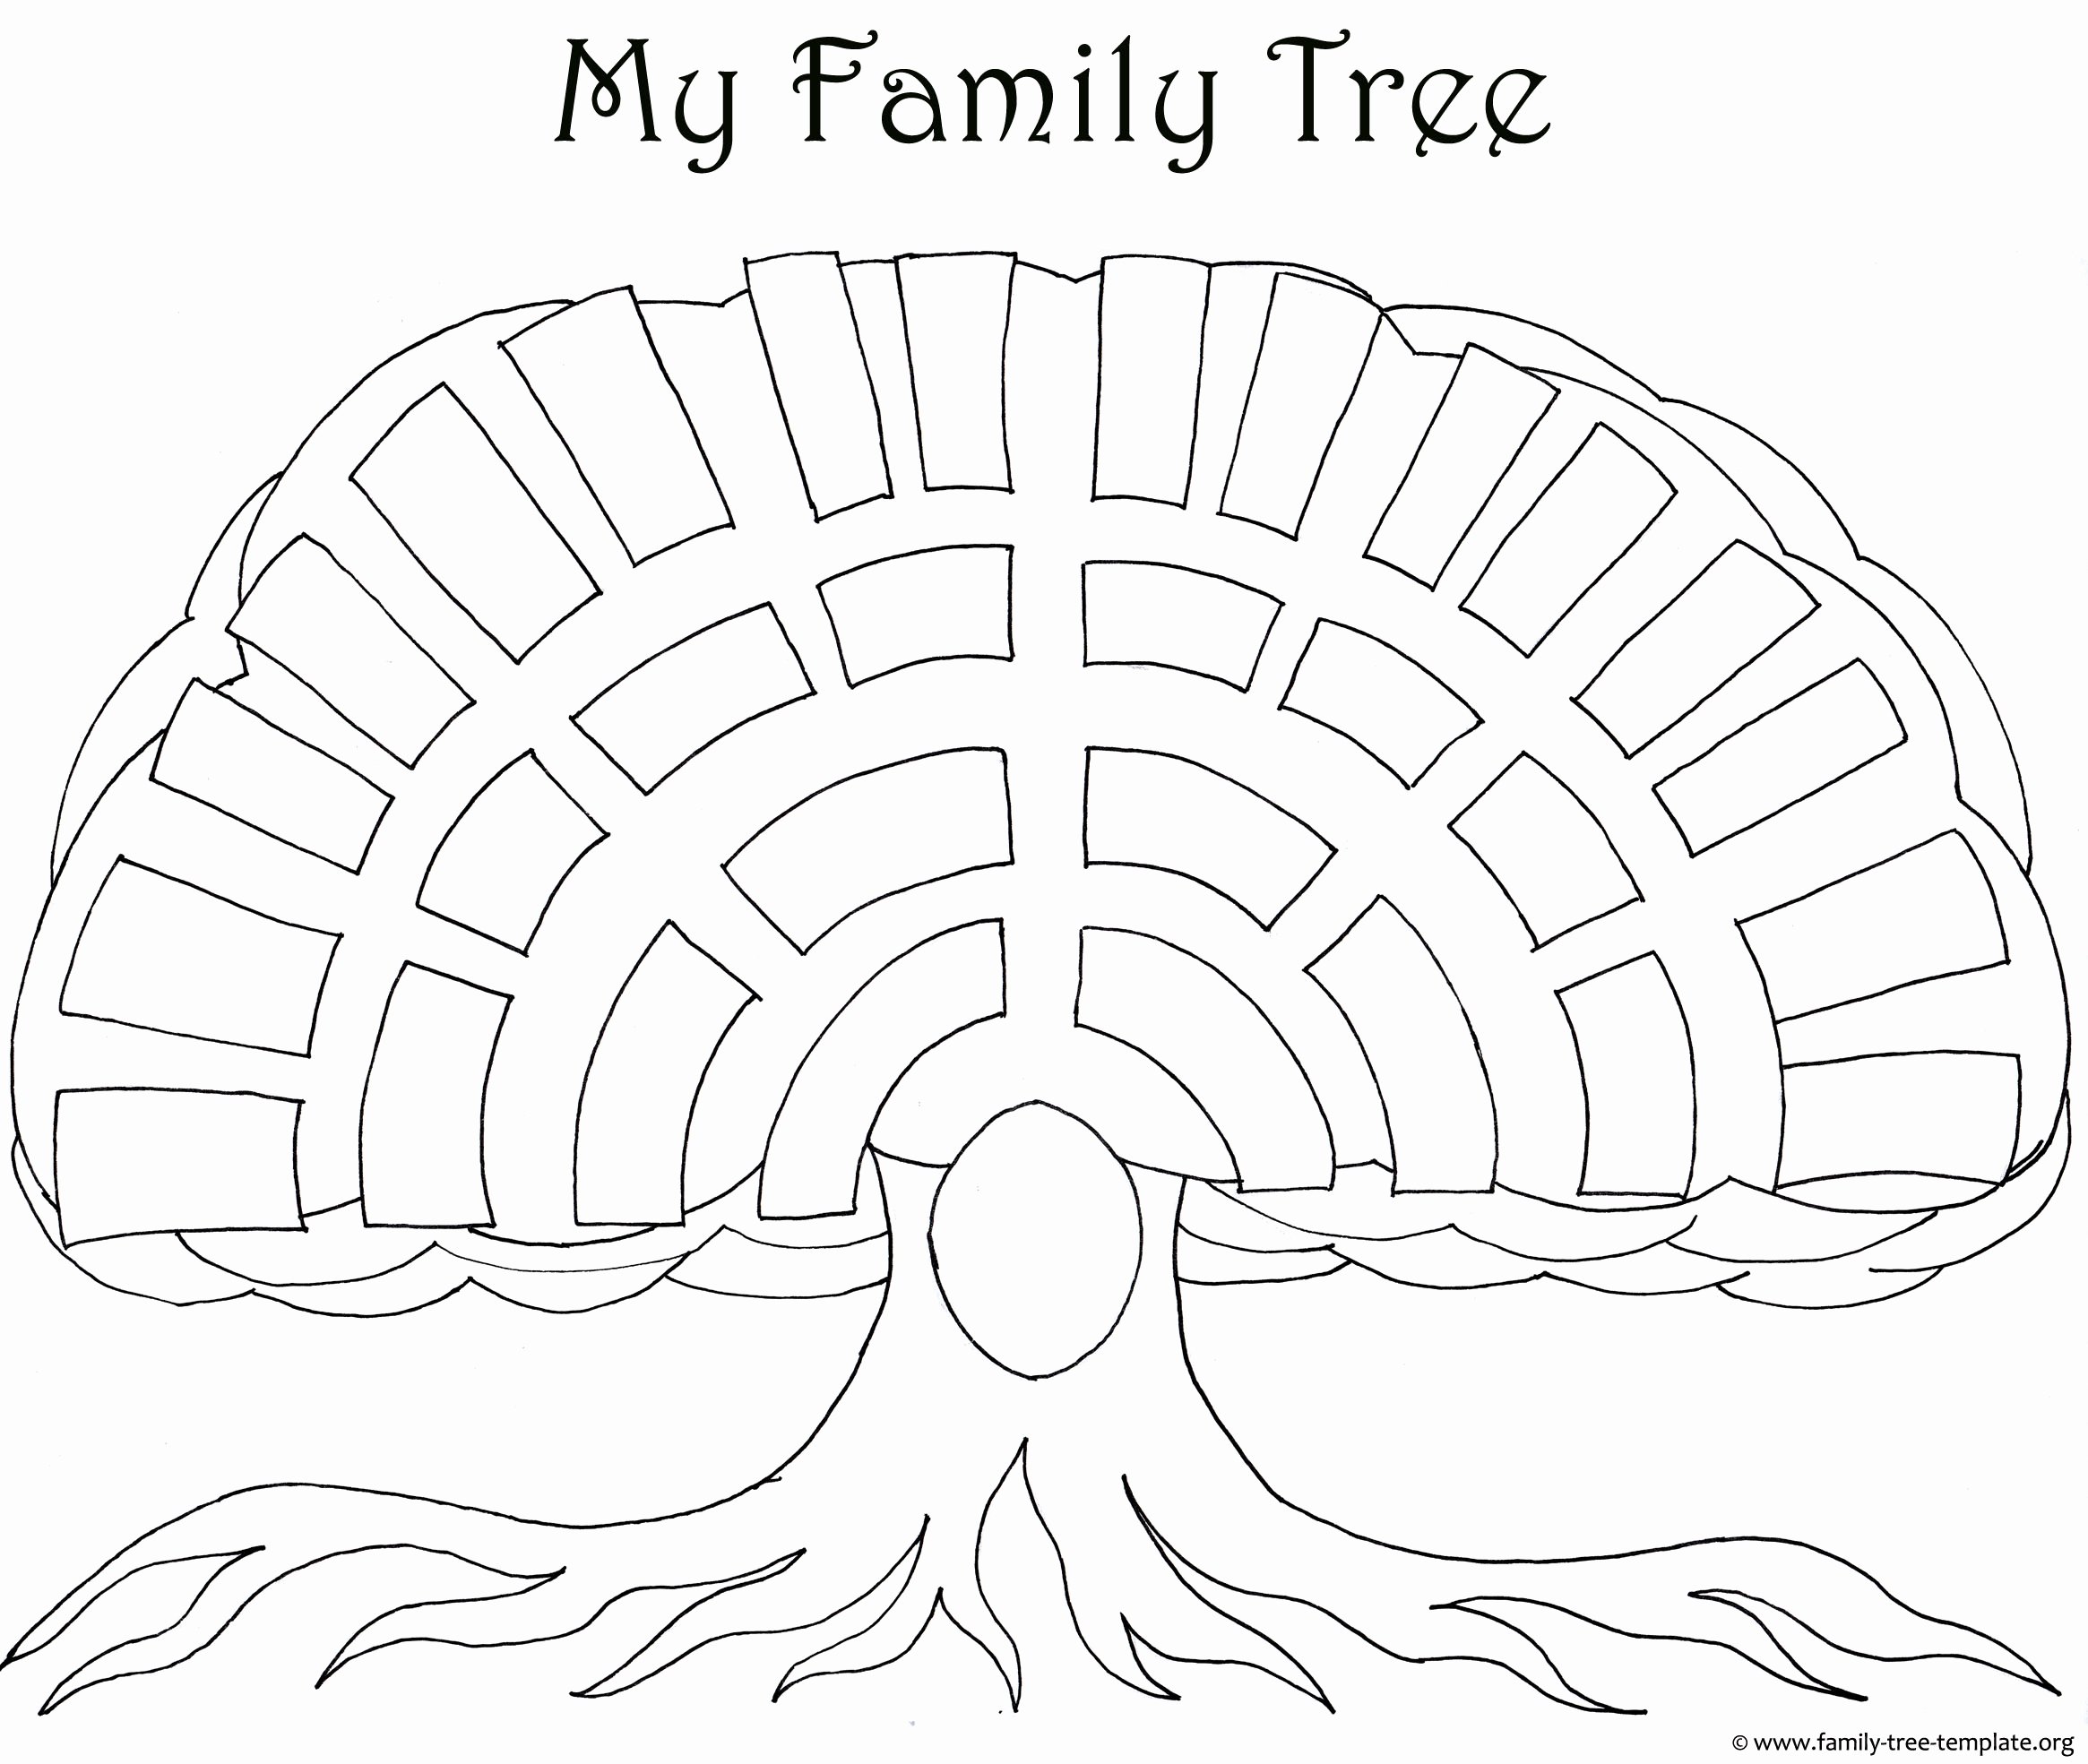 Family Tree Templates &amp; Genealogy Clipart for Your